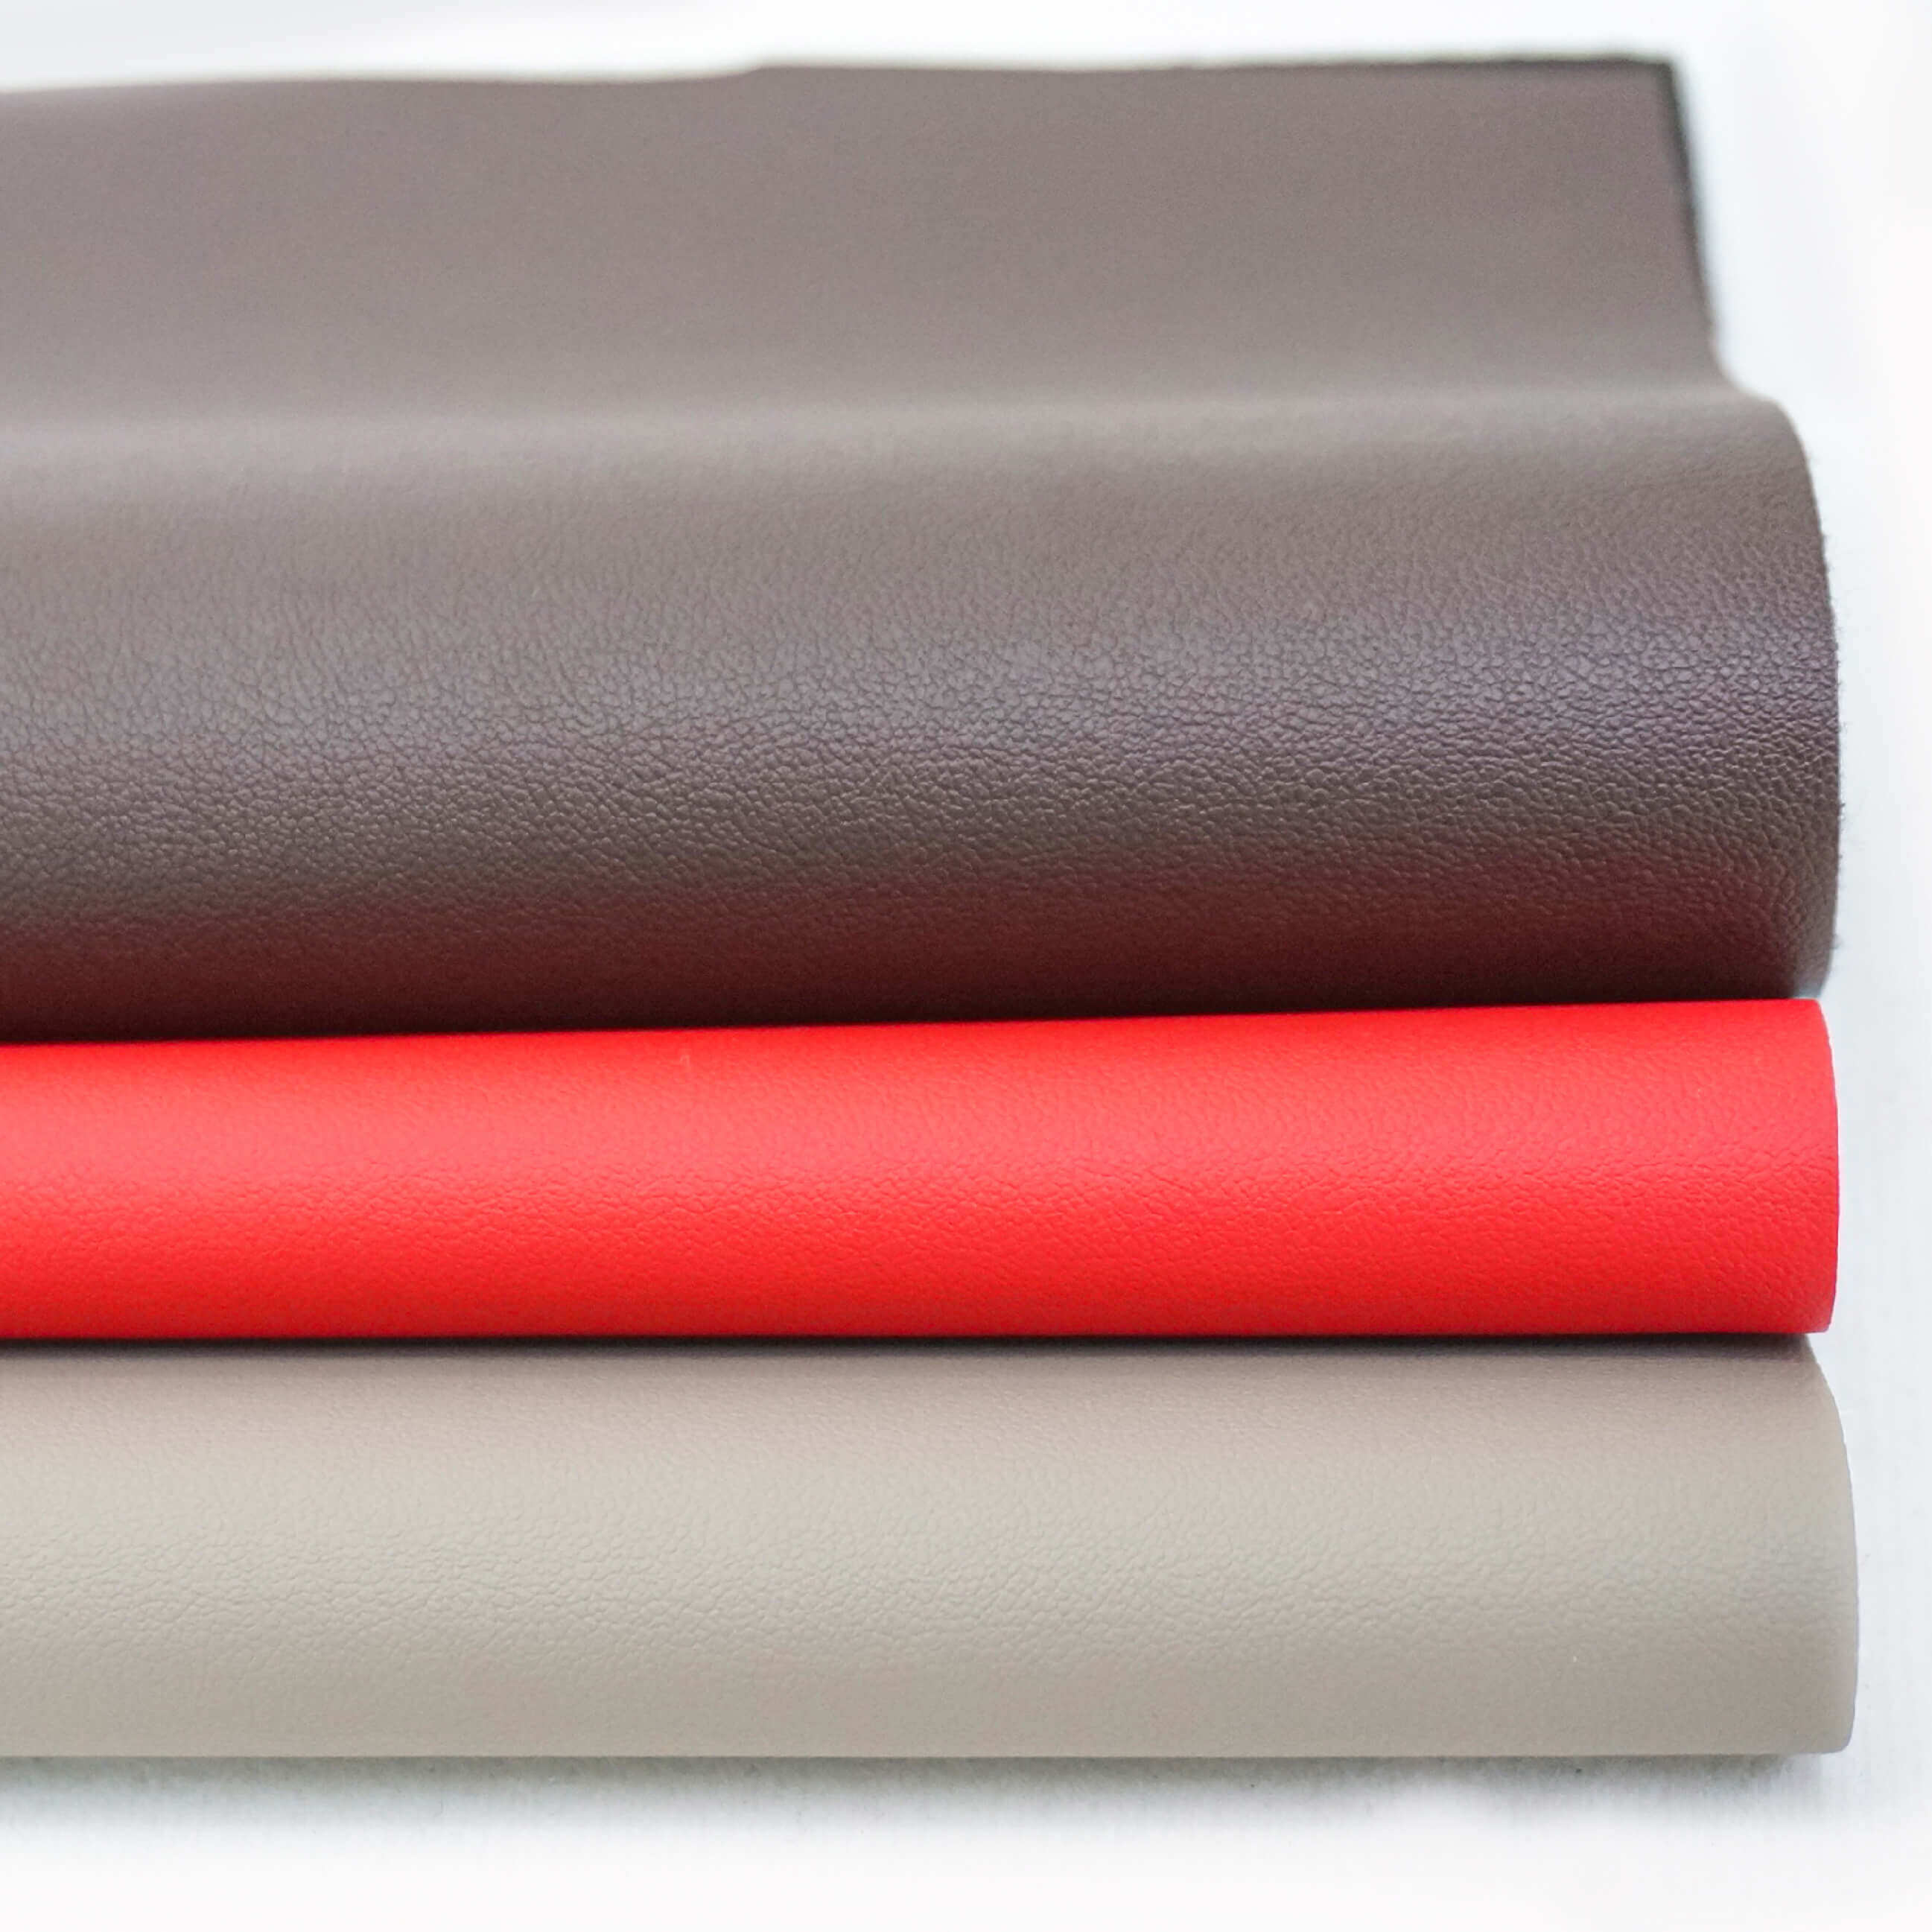 How to Choose the Right Type of Leather for Your Furniture